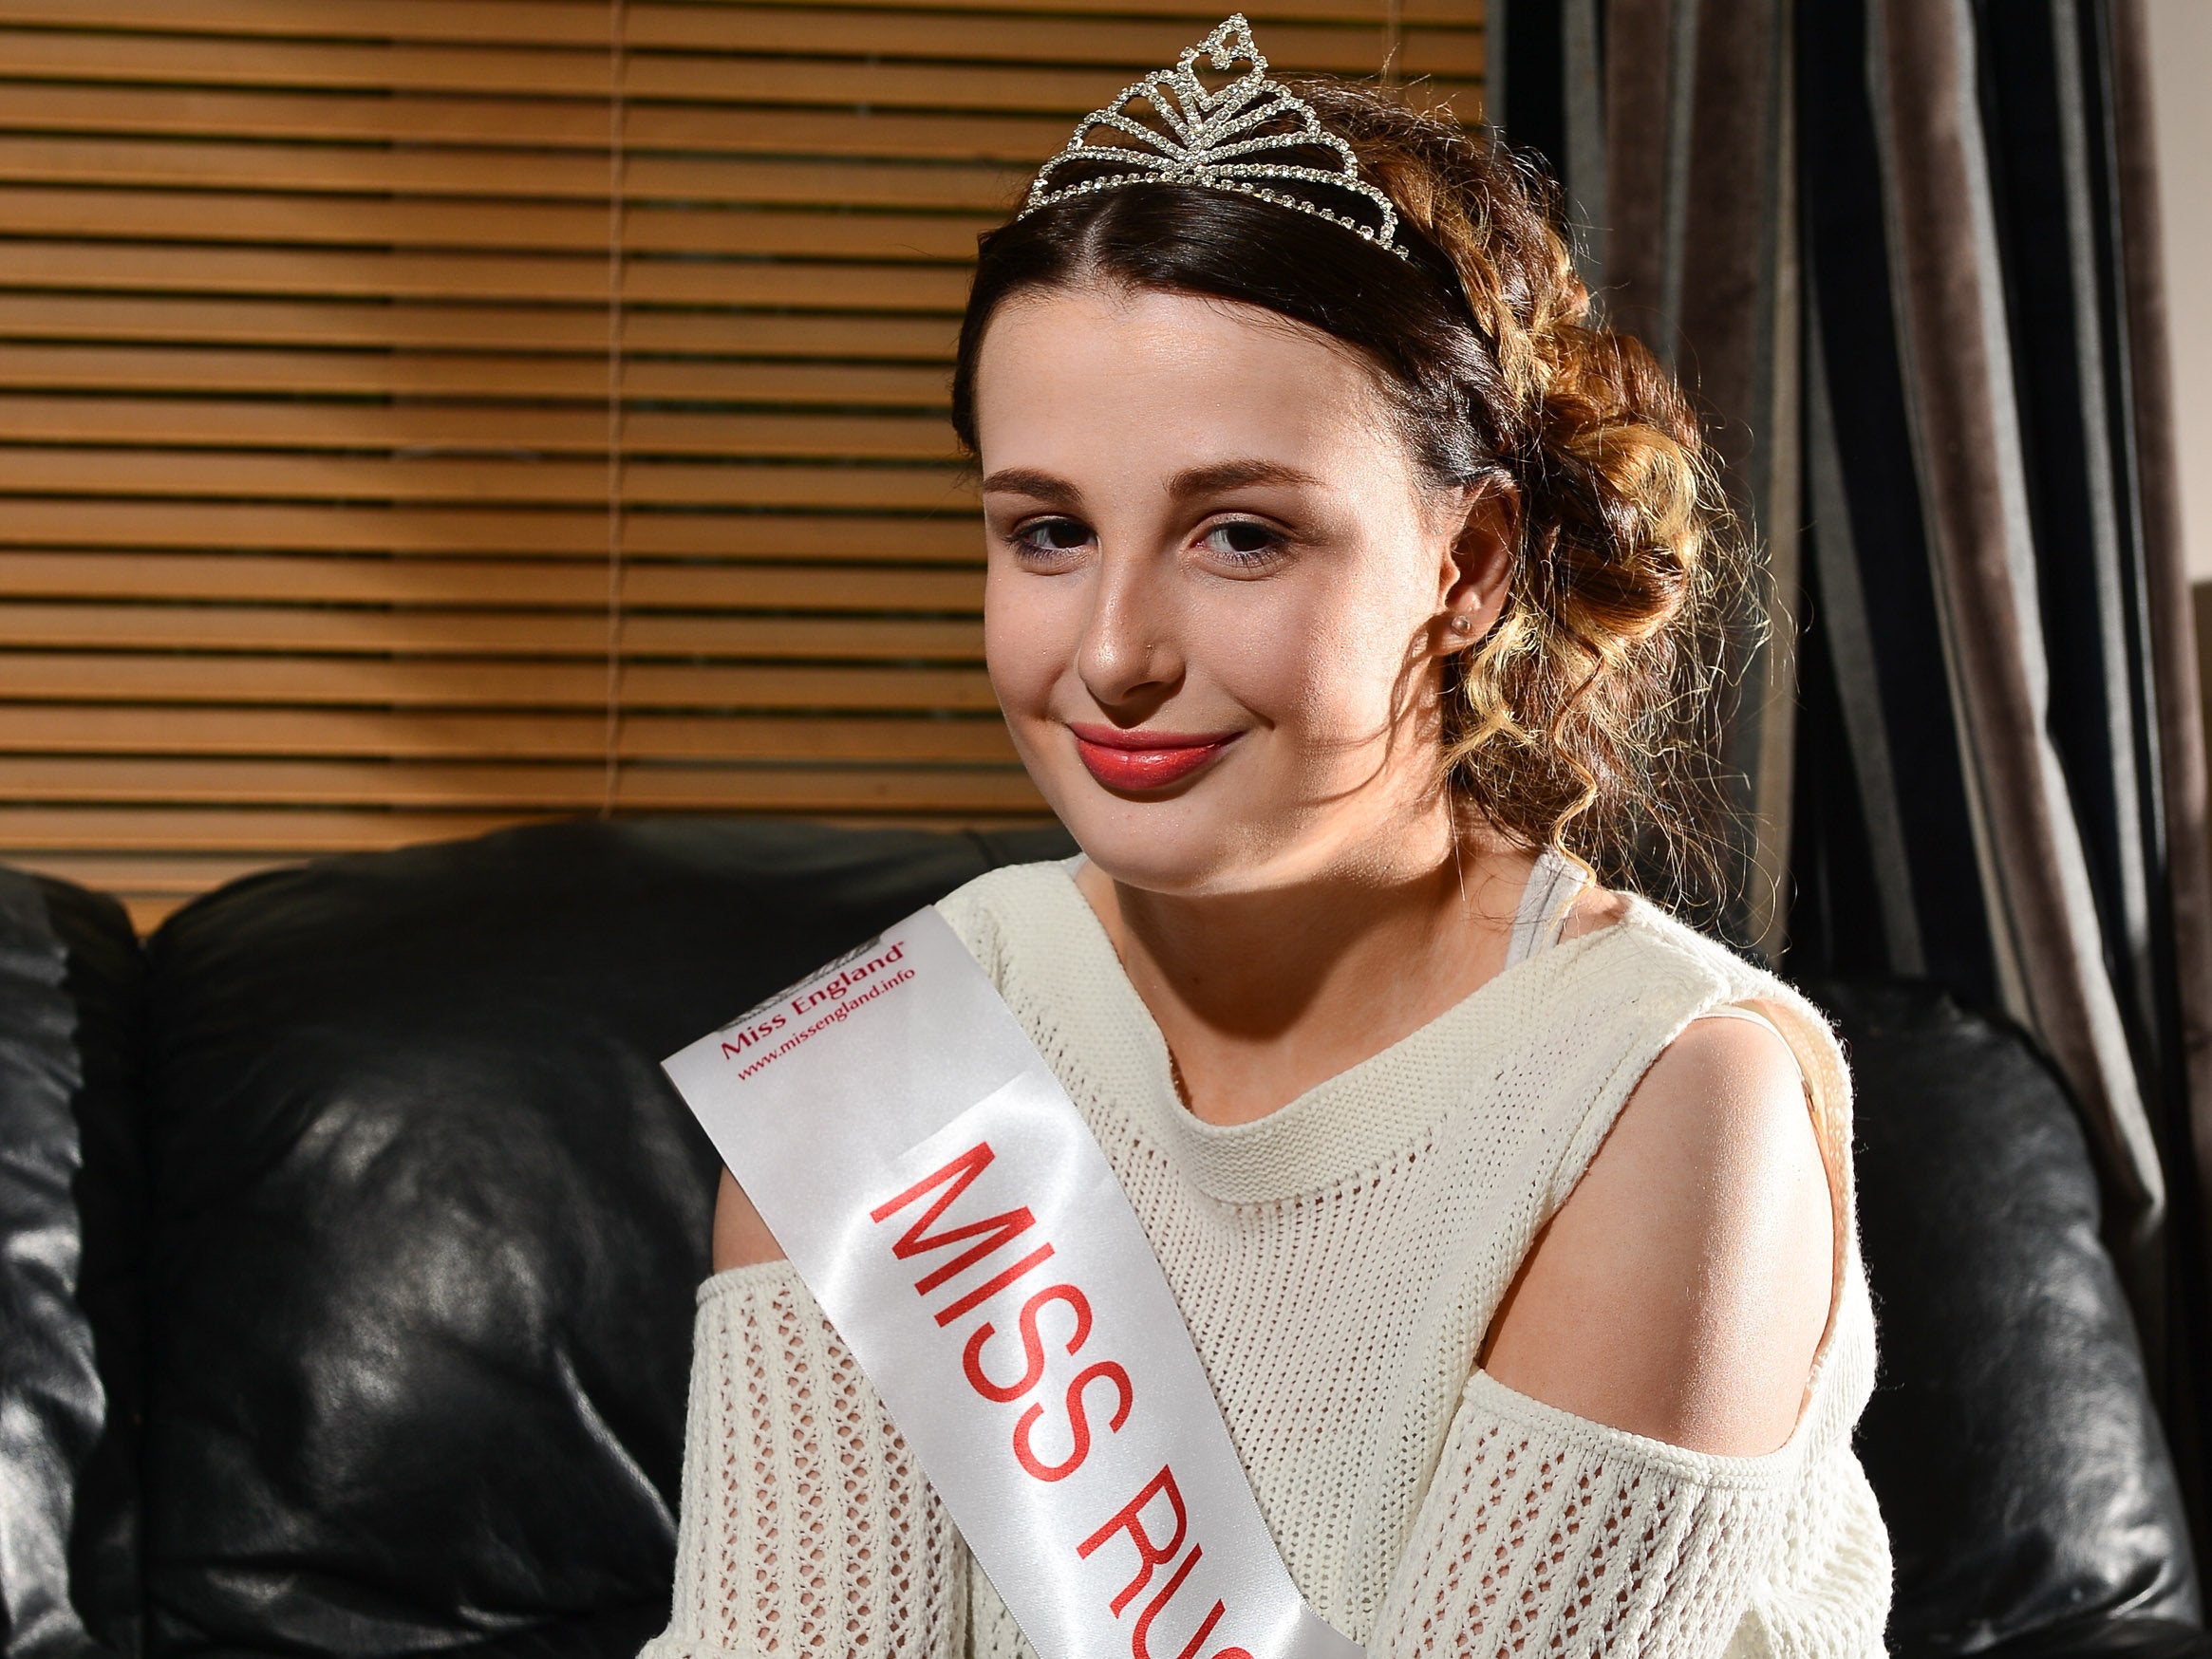 Teenager with cerebral palsy could be first disabled Miss England winner